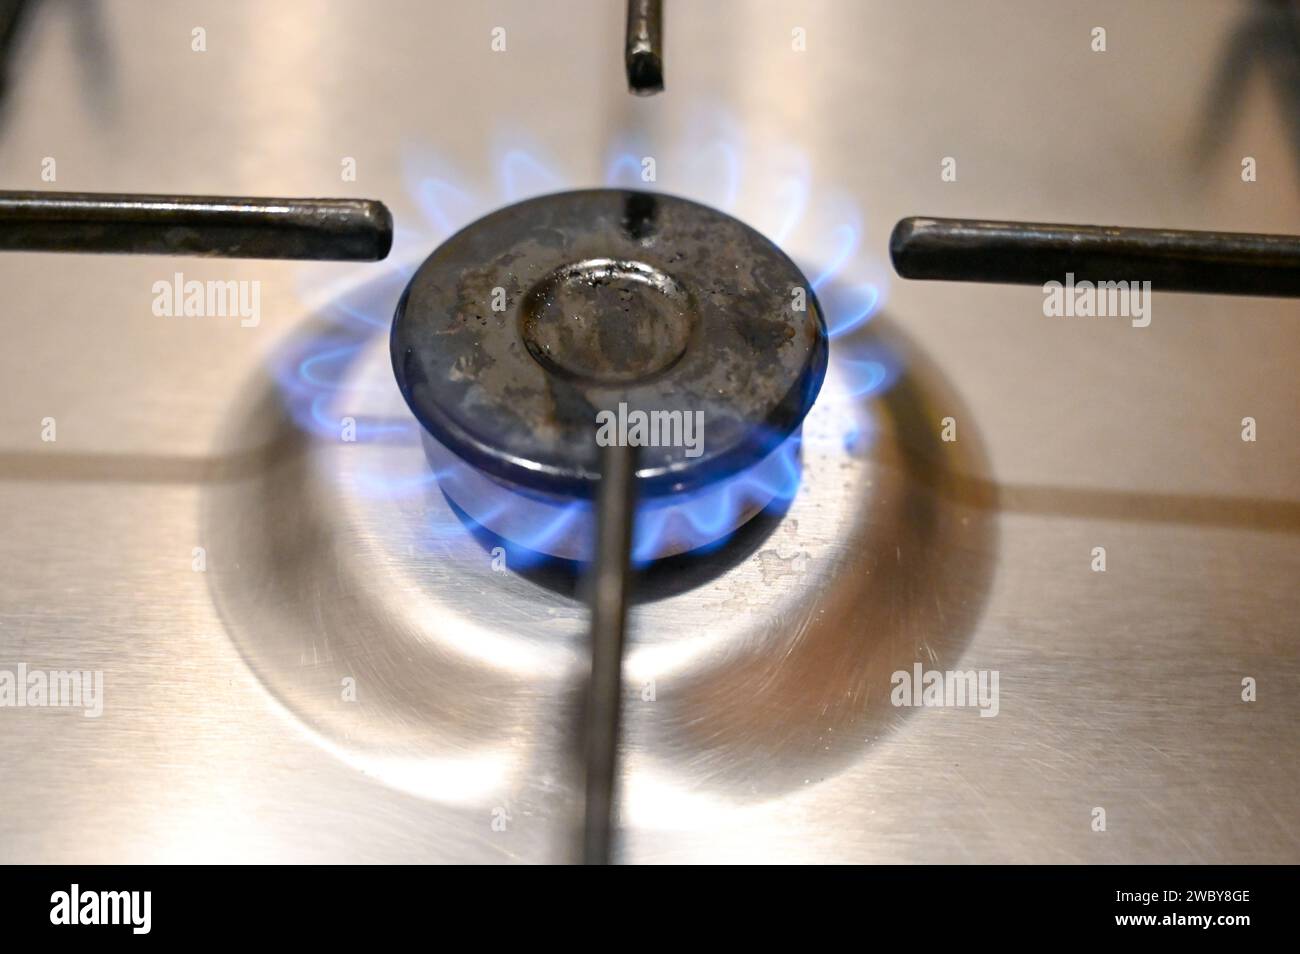 Gas cooker in kitchen. Close up of blue flames on gas stove burner in home. Burning fire on propane gas cooker. Stock Photo